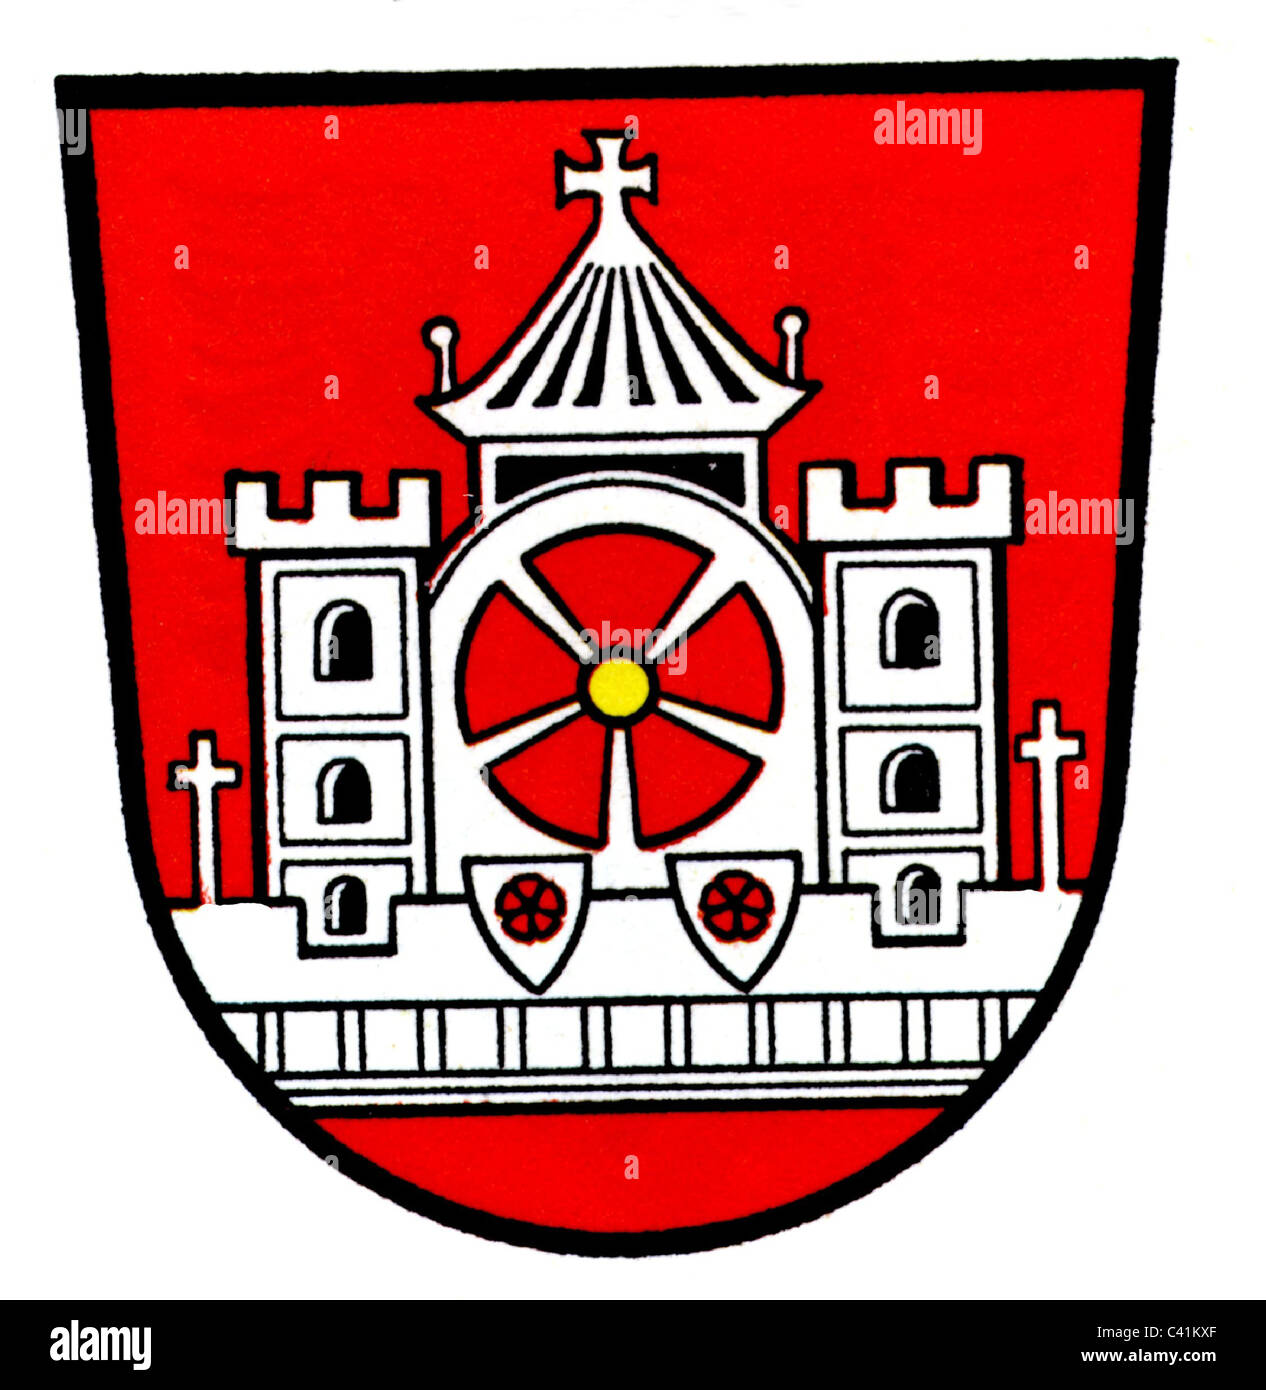 coat of arms / emblems, Detmold, city arms, North Rhine-Westphalia, Germany, Additional-Rights-Clearences-Not Available Stock Photo